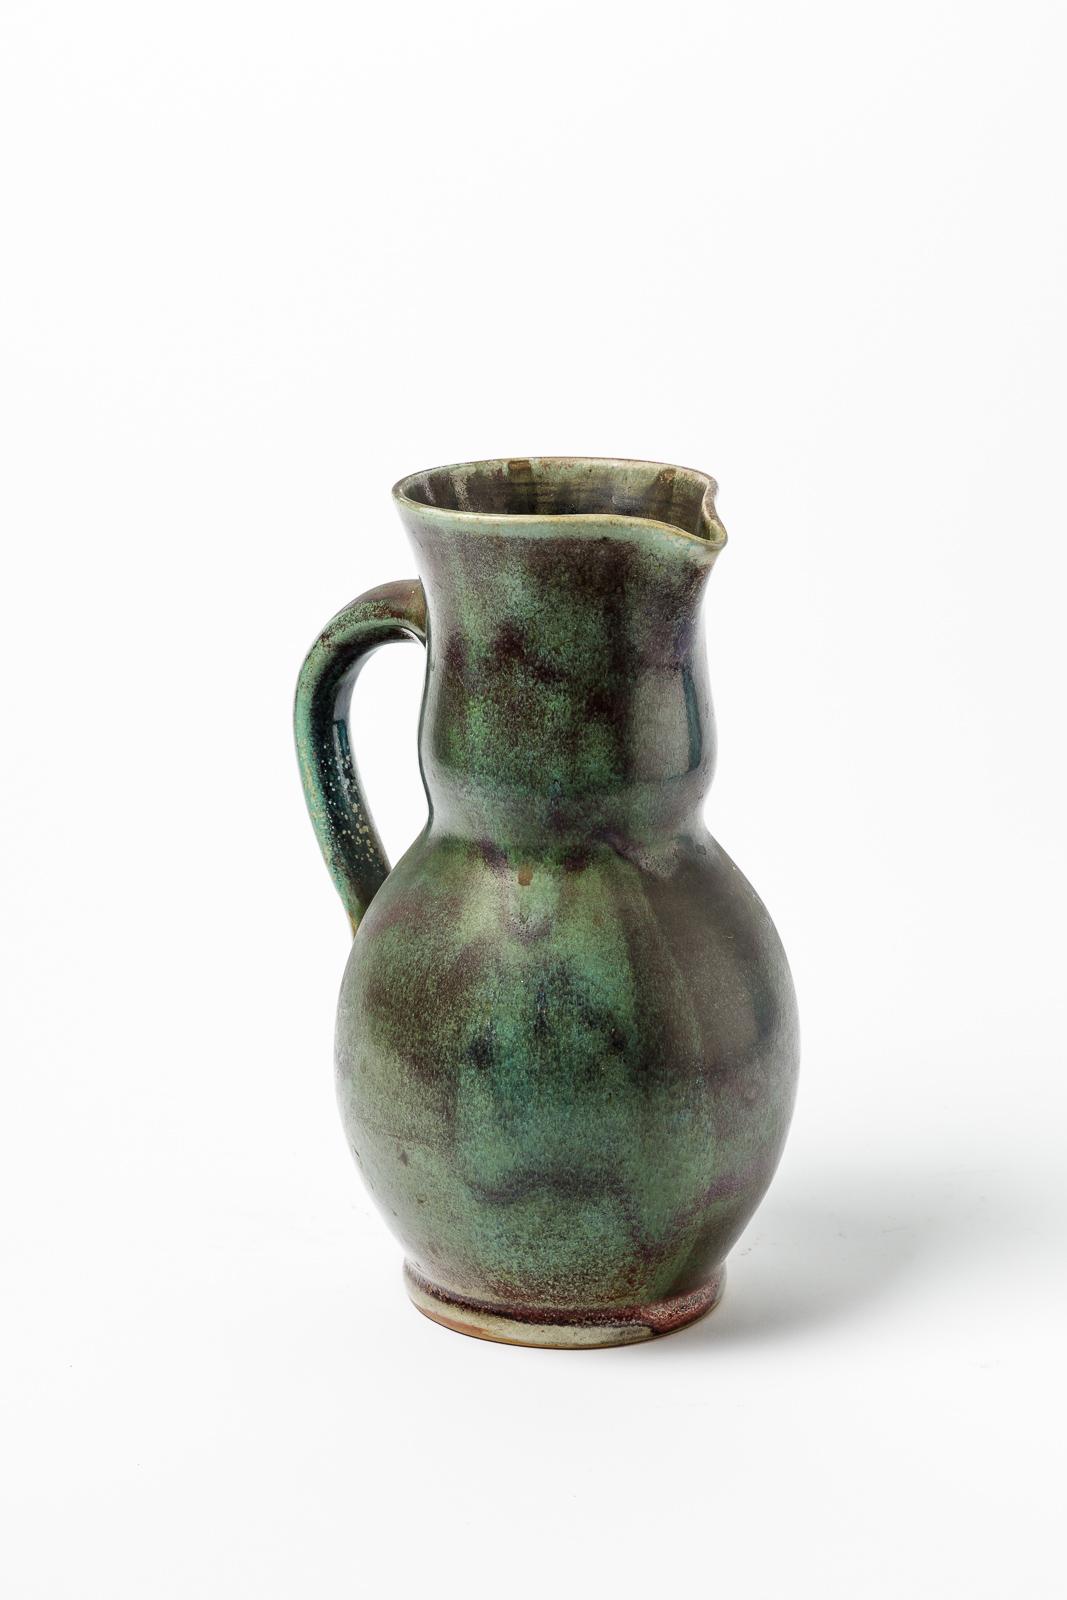 20th Century Green Stoneware Ceramic Pitcher by Jean Maubrou Saint Amand, 1950 For Sale 1